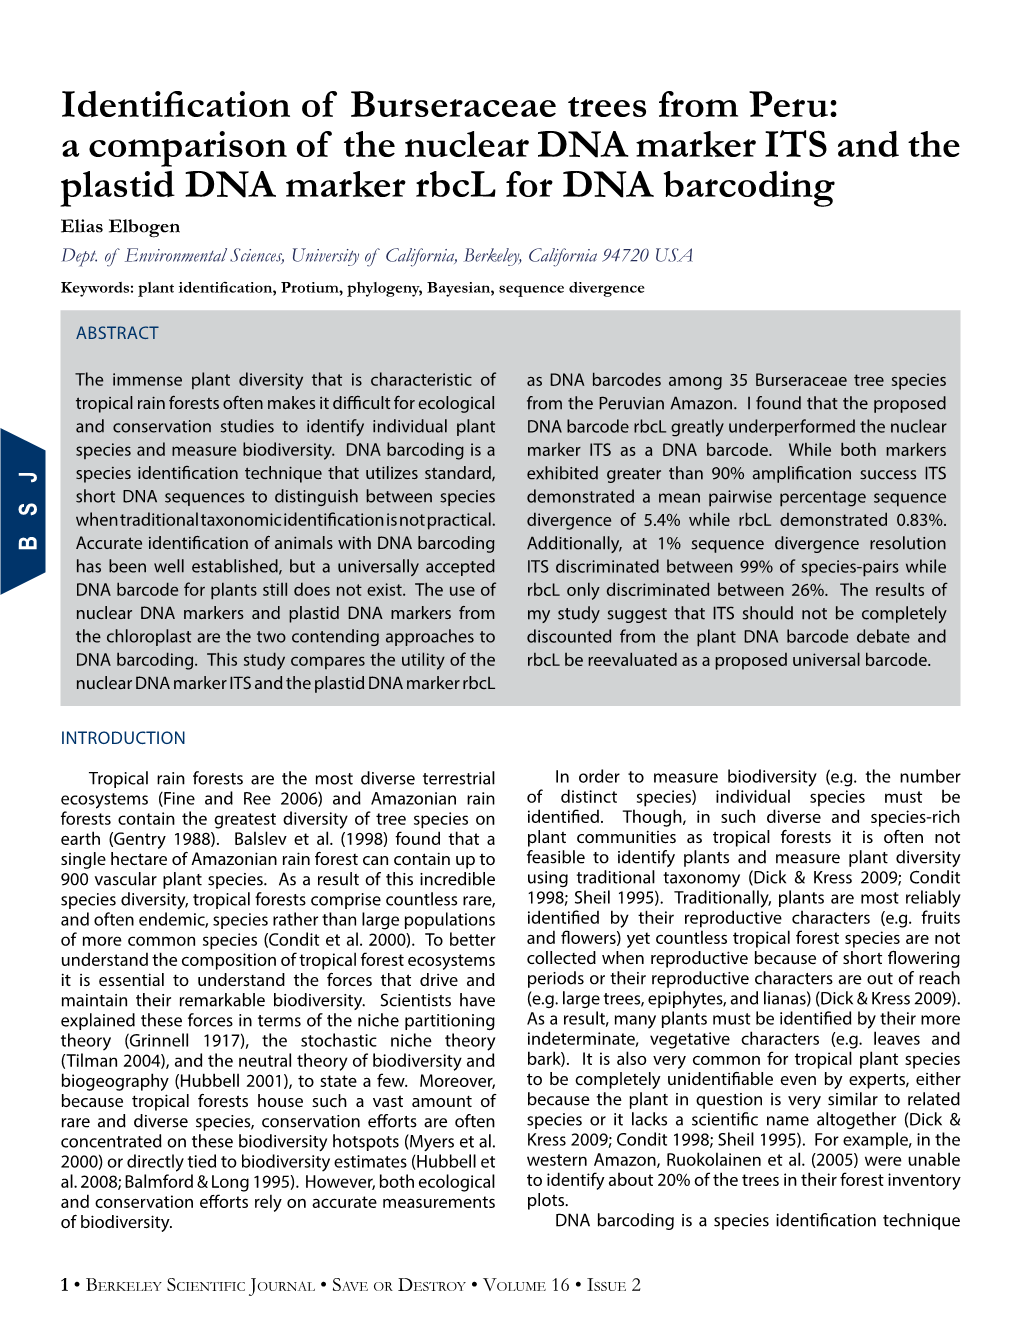 Identification of Burseraceae Trees from Peru: a Comparison of the Nuclear DNA Marker ITS and the Plastid DNA Marker Rbcl for DNA Barcoding Elias Elbogen Dept